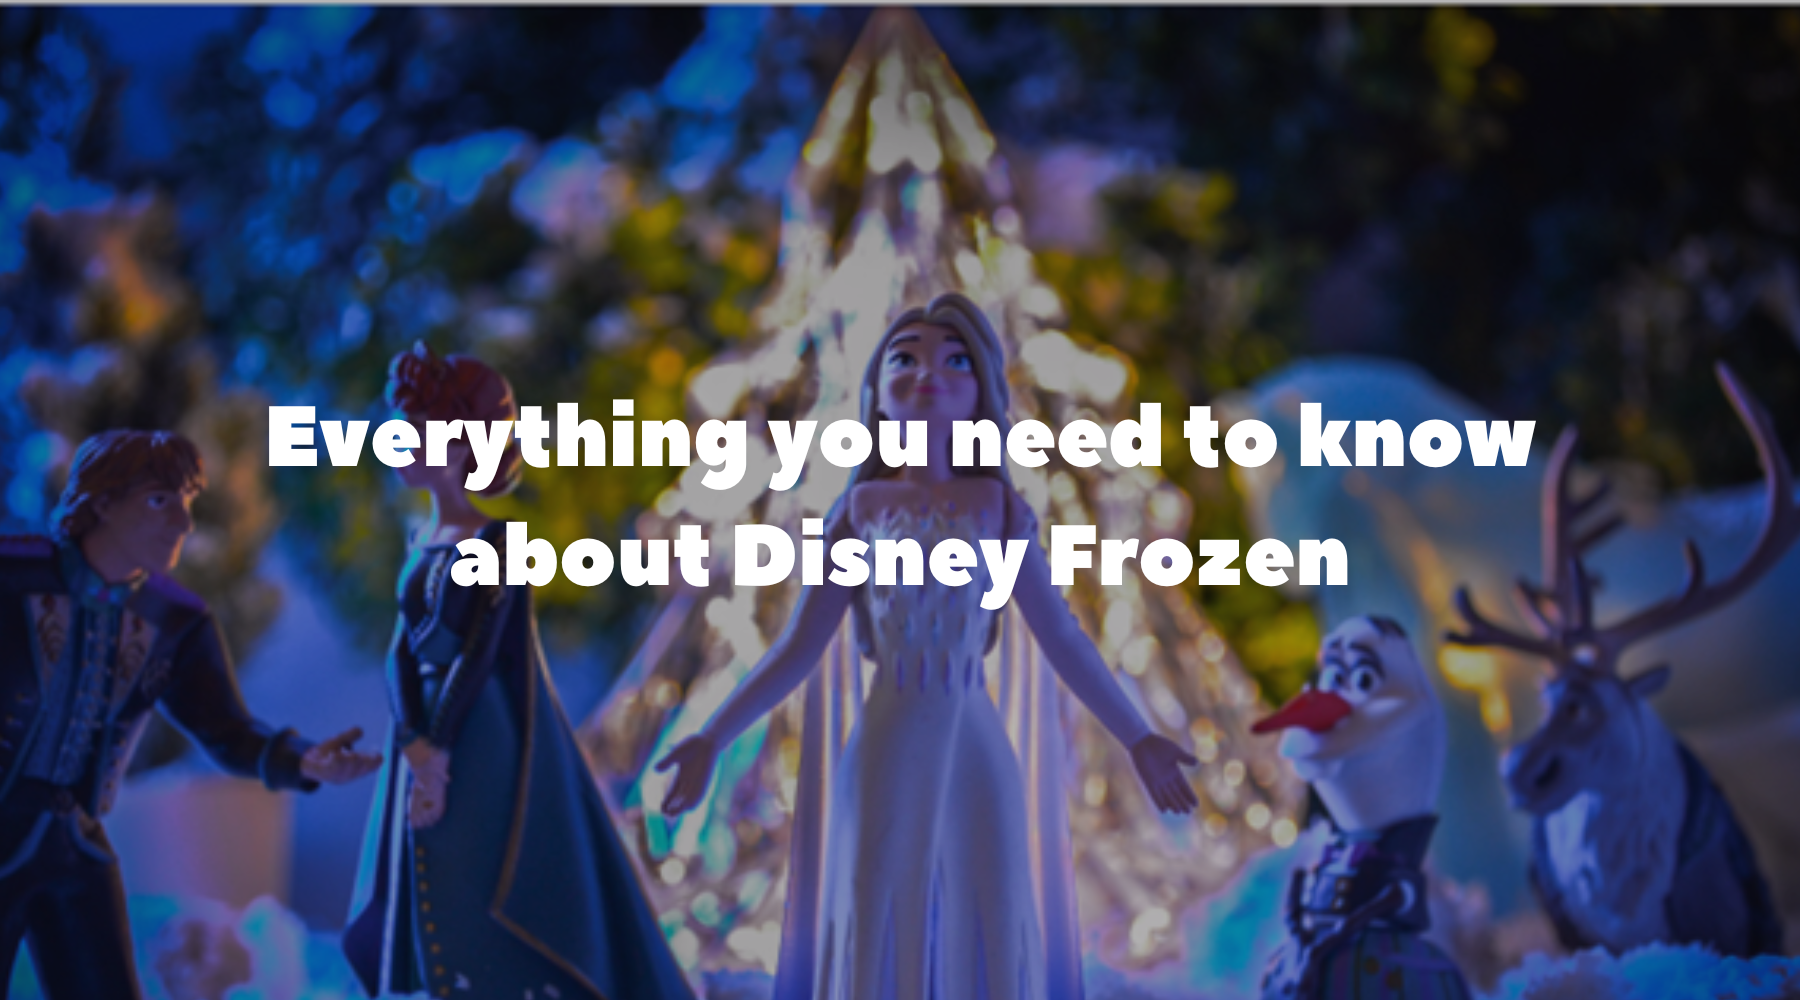 Everything you need to know about Disney Frozen